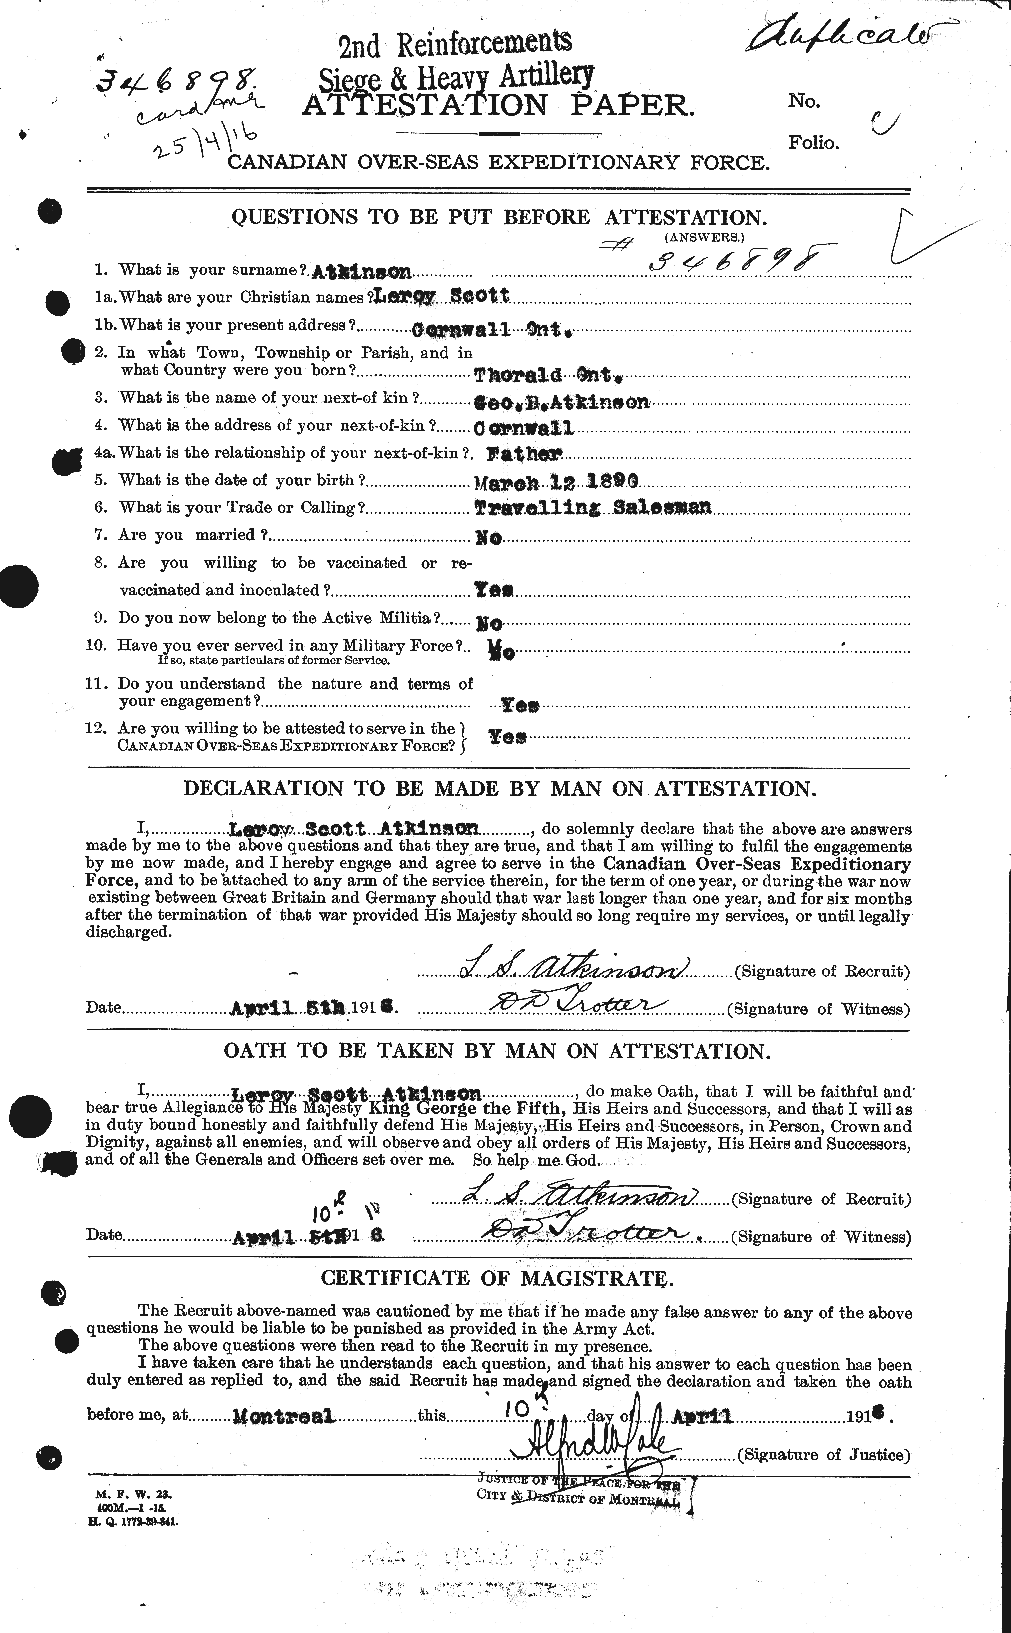 Personnel Records of the First World War - CEF 217277a